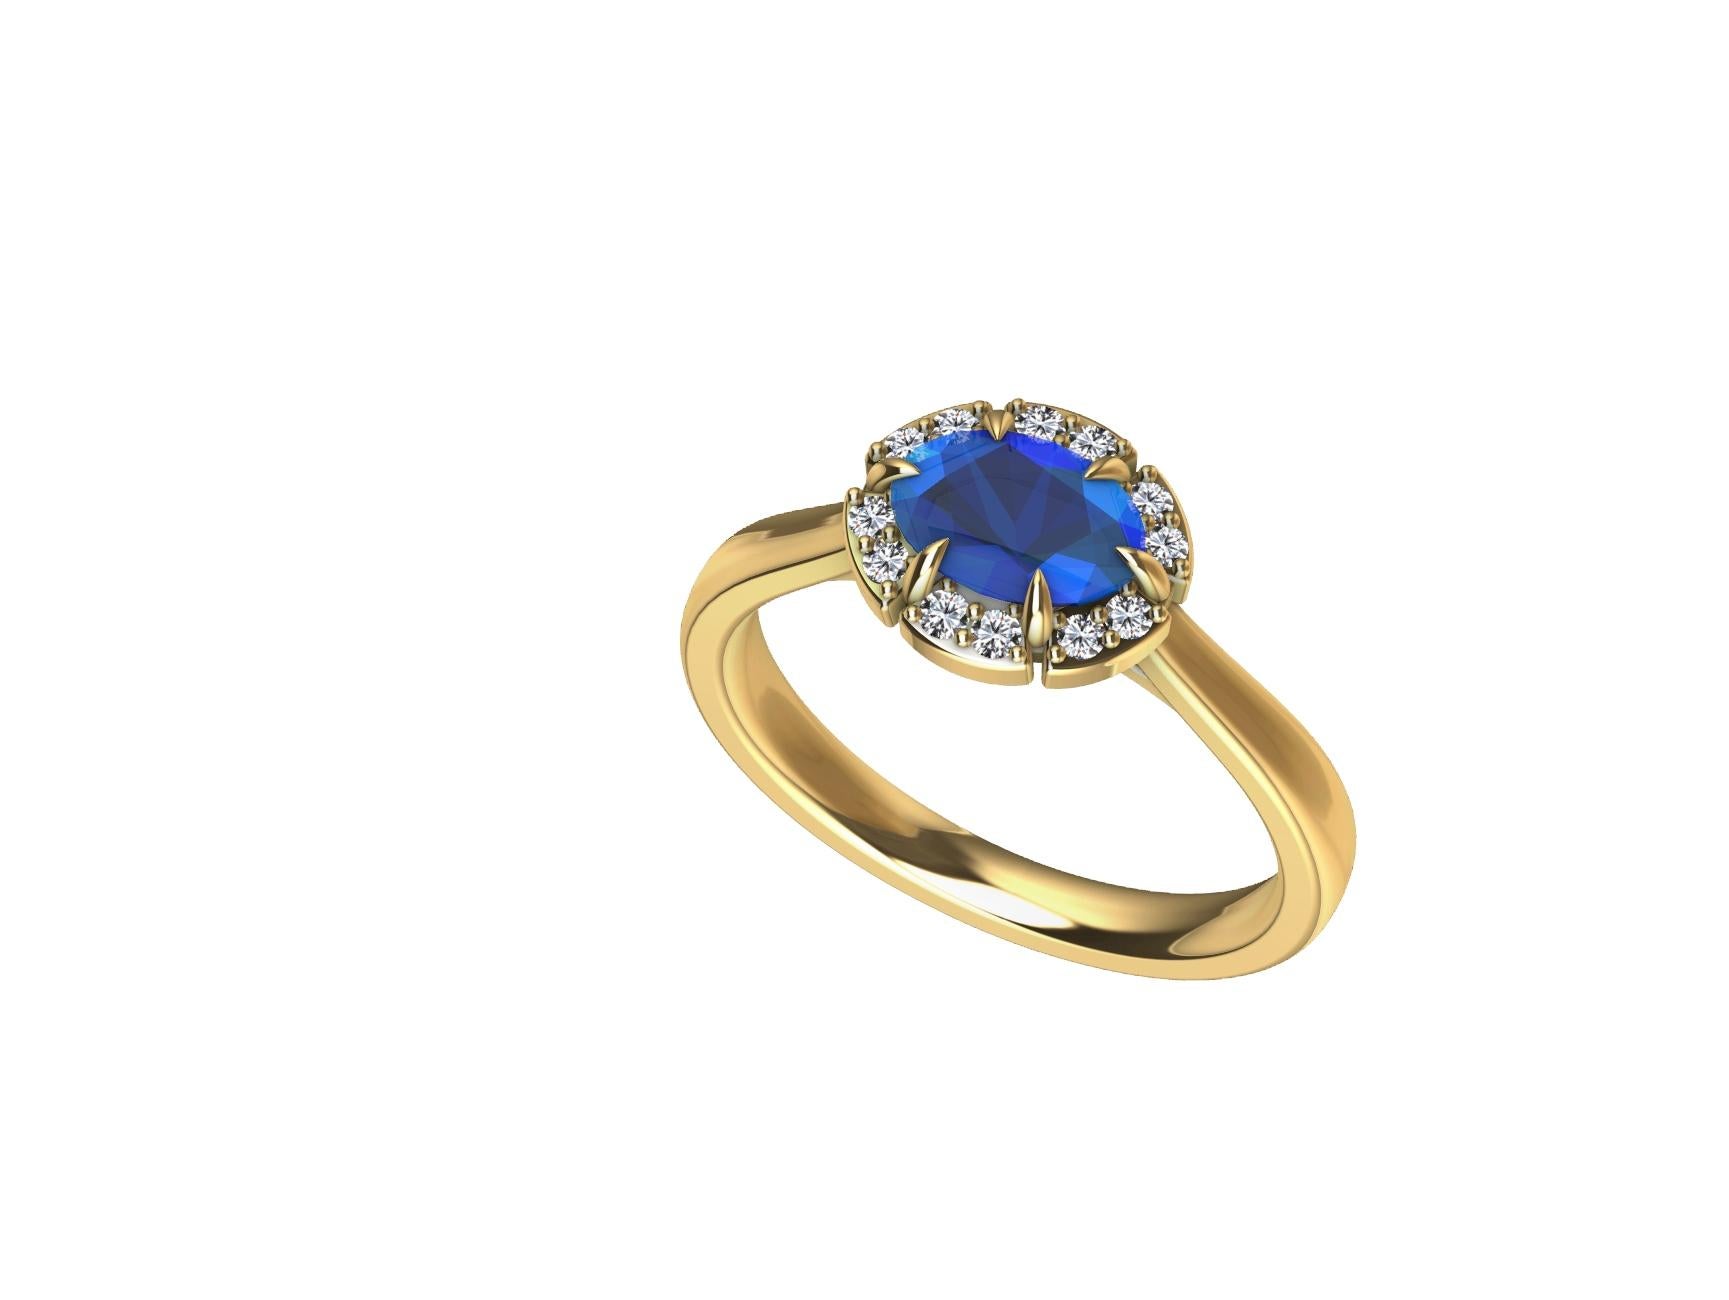 For Sale:  18 Karat Yellow Gold Art Deco Blue Sapphire Inspired Engagement Ring 7